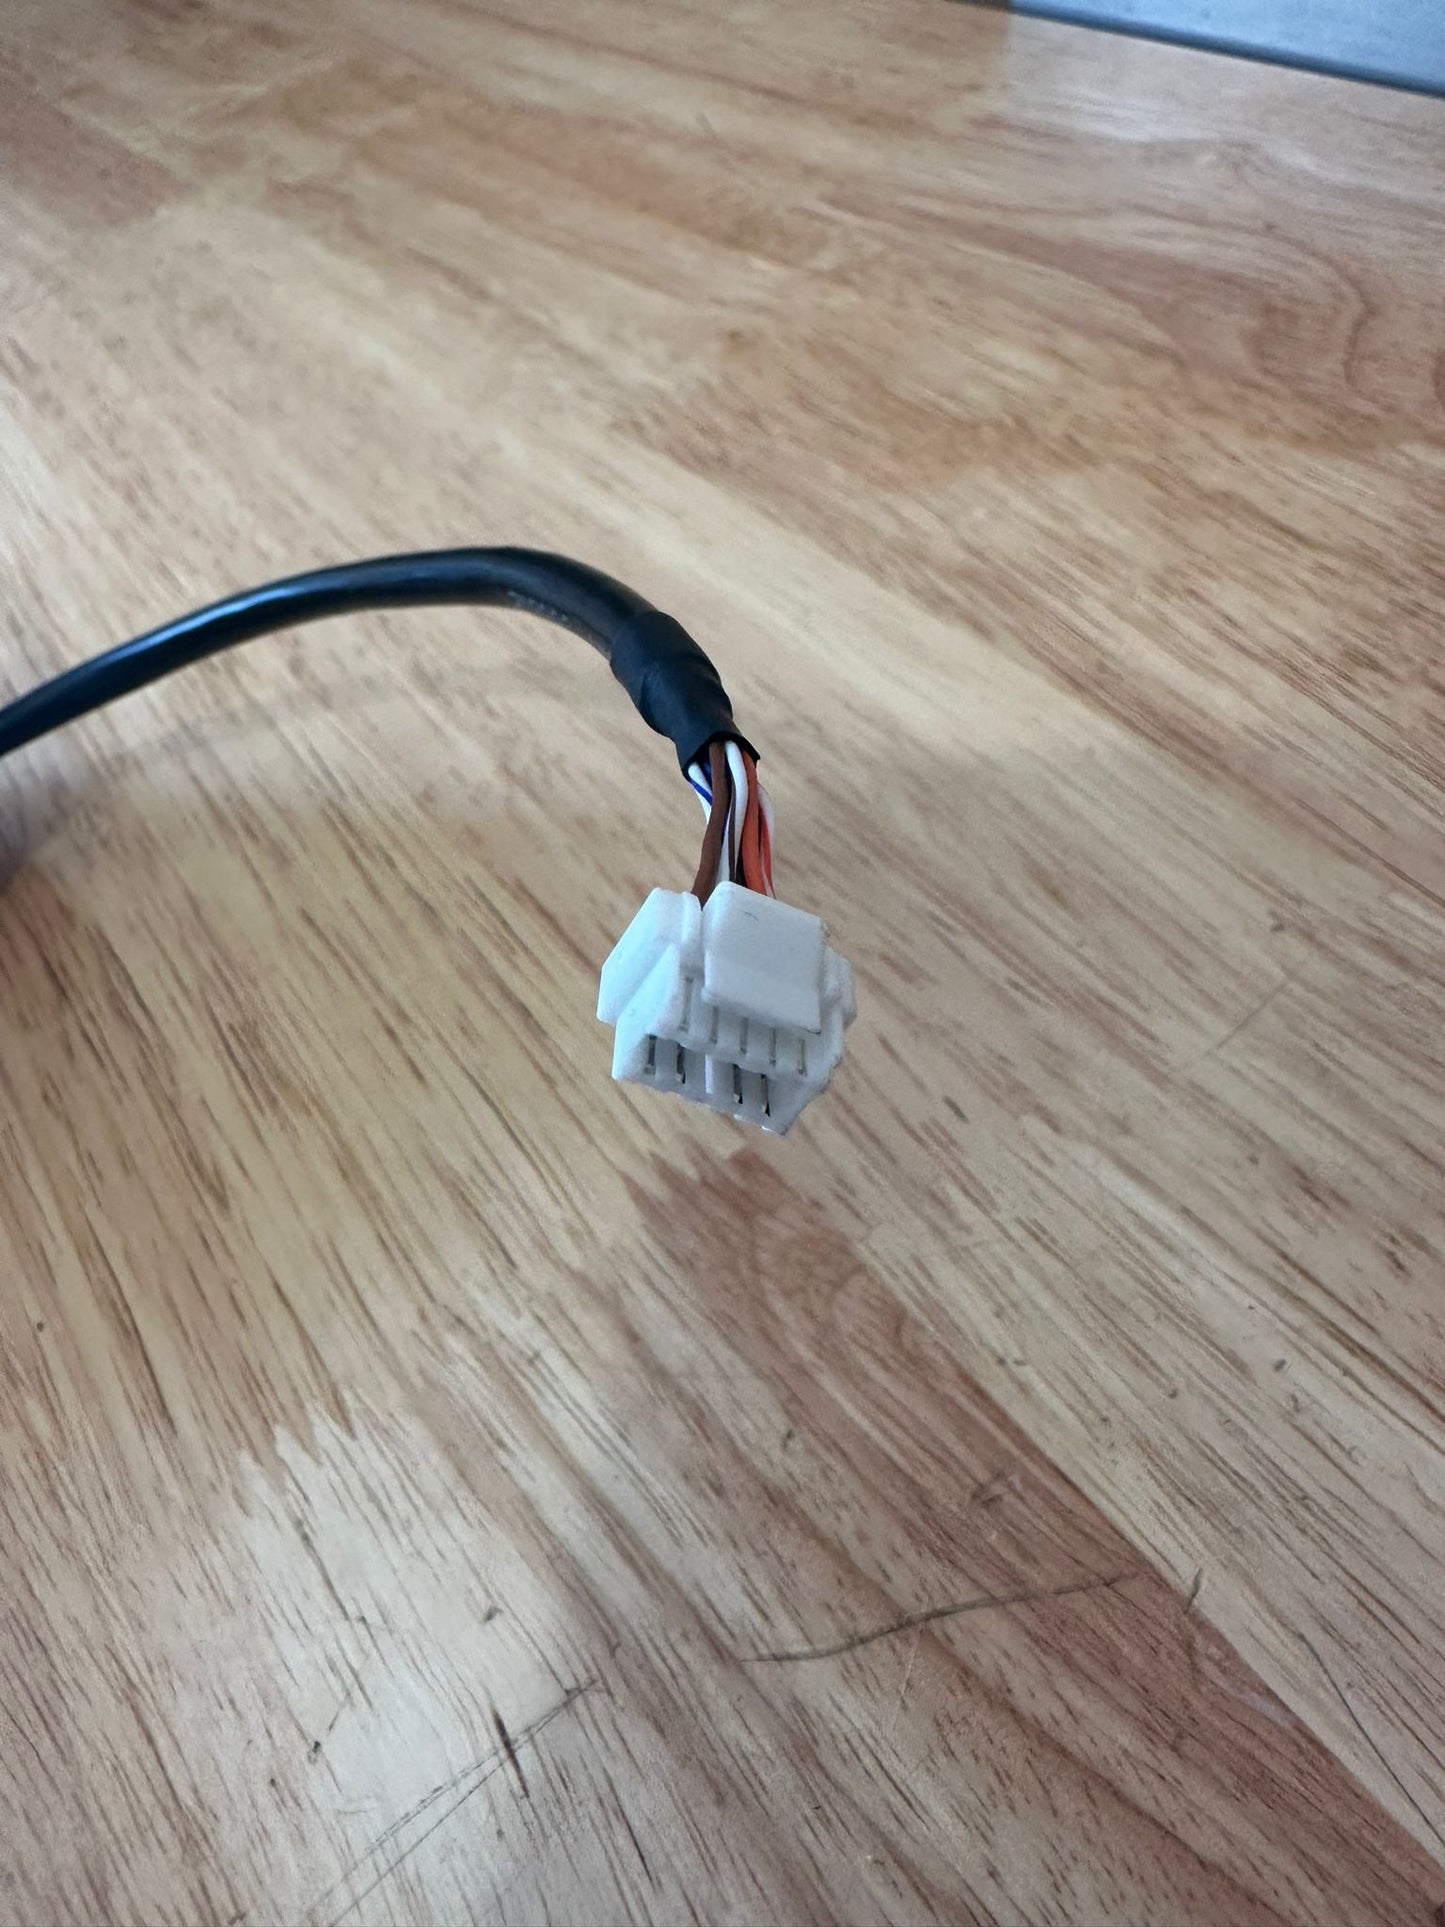 Dishy to RJ45 Cable